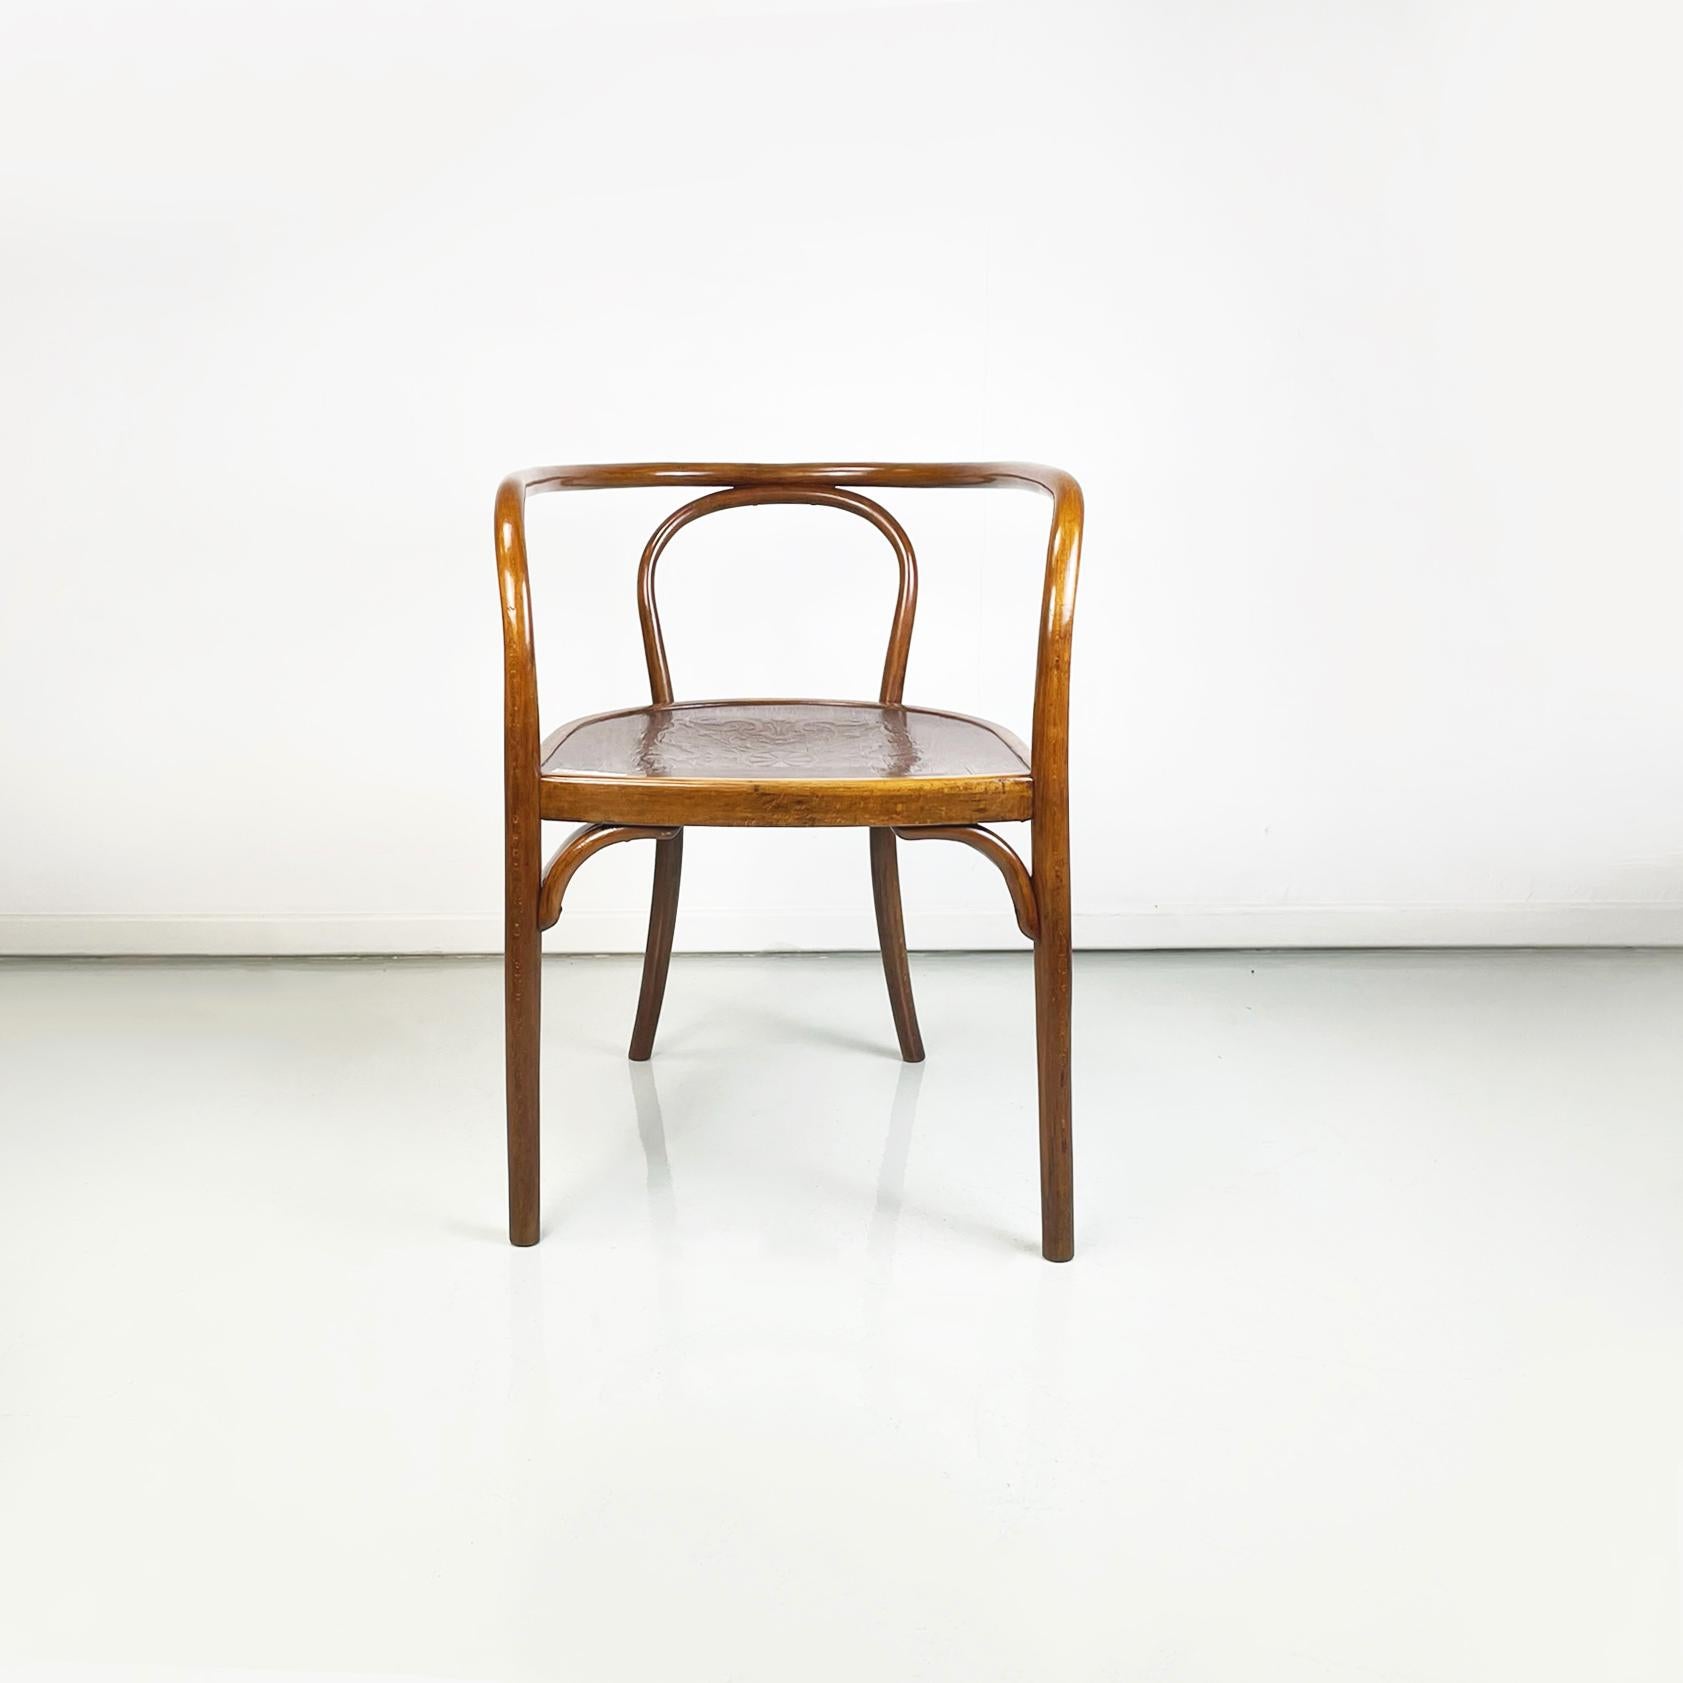 Austrian chair in wood with embossed floral print by Thonet, 1900s
Fantastic and iconic chair Thonet with semi-round wooden seat with embossed floral print. The round section structure is in curved wood.
It was produced by Thonet in the early